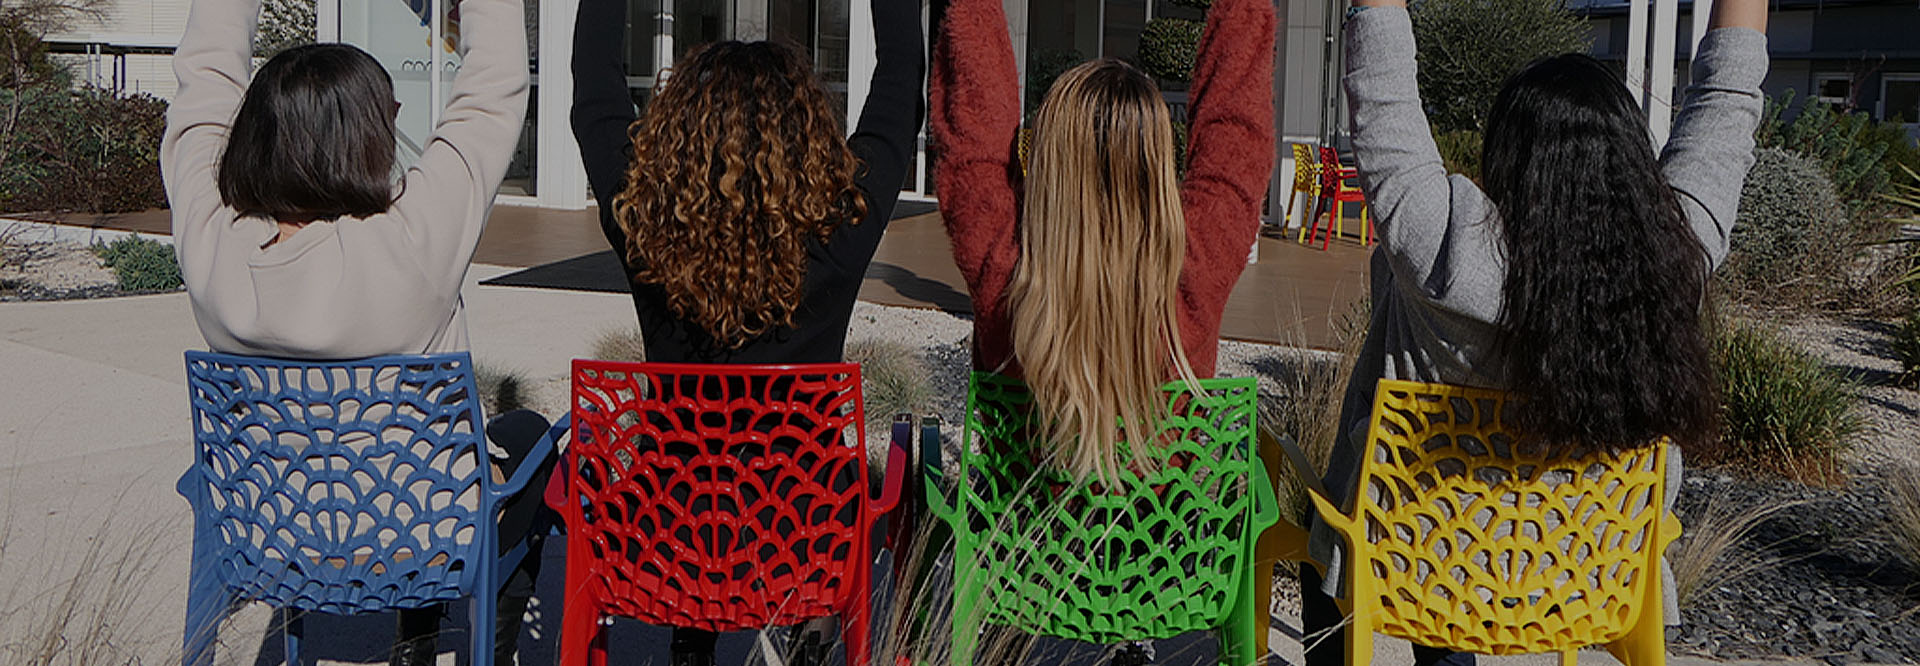 Four people sitting on colourful chairs and raising their hands. Viewed from the back. (photo)